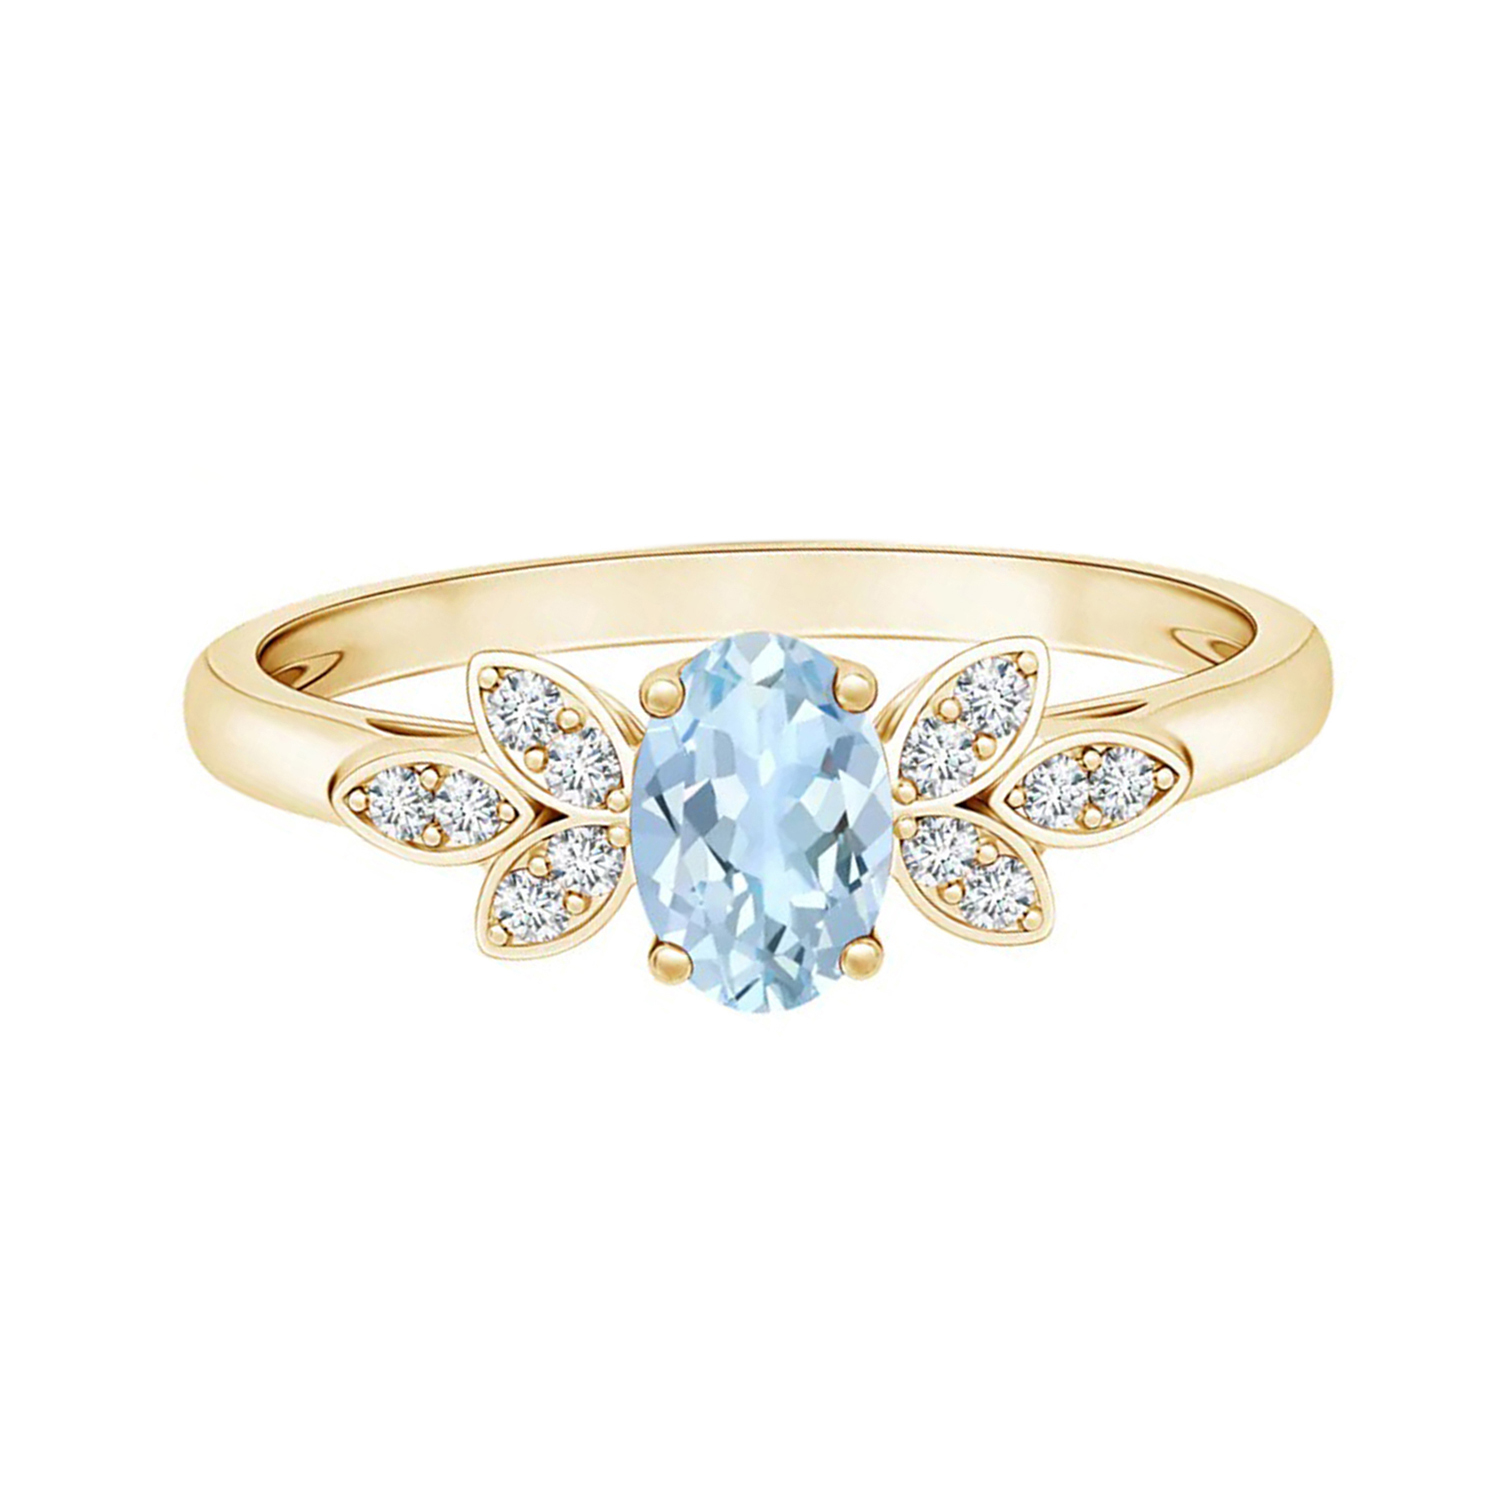 Vintage Style Oval Aquamarine Ring with Simulated Diamond Accents 9K Yellow Gold